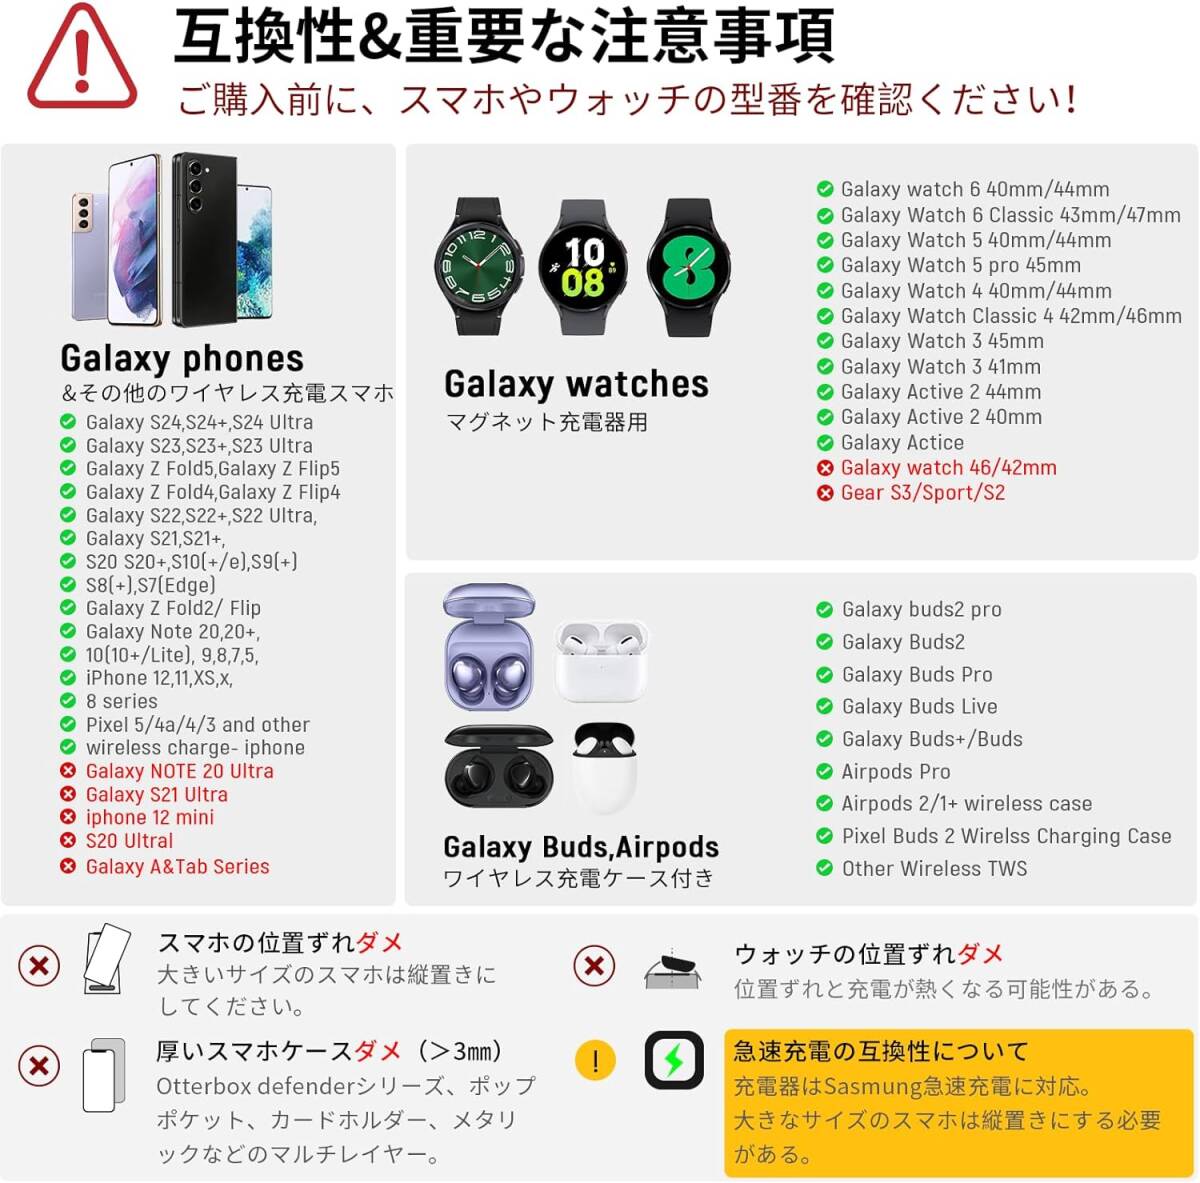 3in1 ワイヤレス充電器 目覚まし時計付き Galaxy S24 ~ S7, Note 20 ~ 8, Galaxy watch 6/5/3/active2/active, Galaxy Buds ブラック_画像5